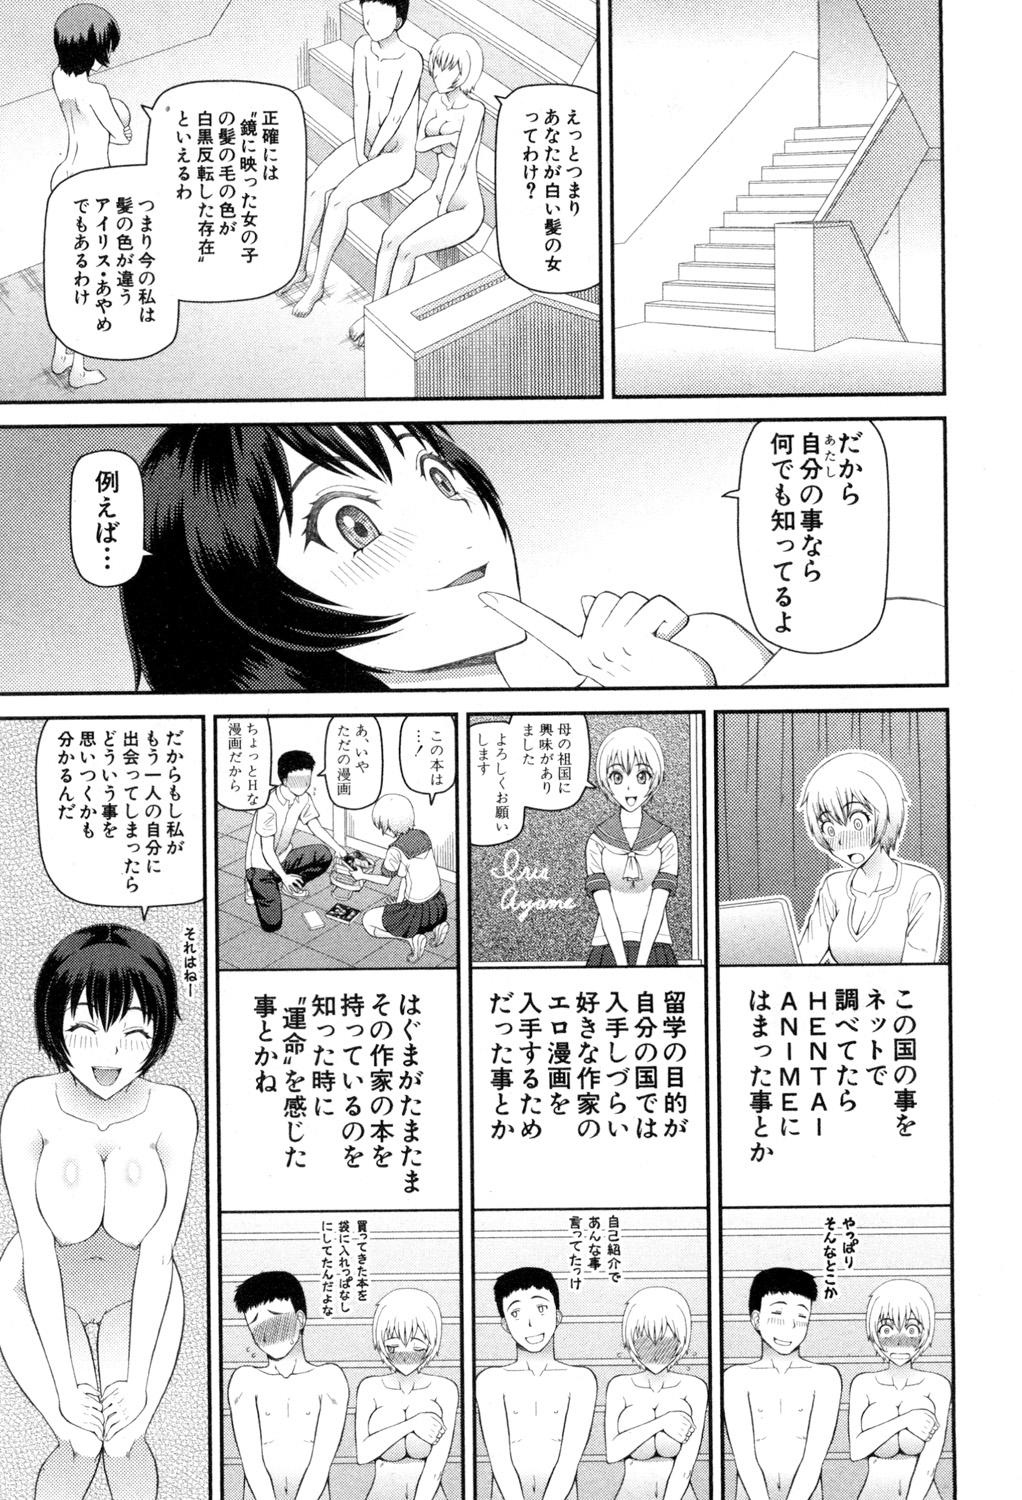 BUSTER COMIC 2015-07 167